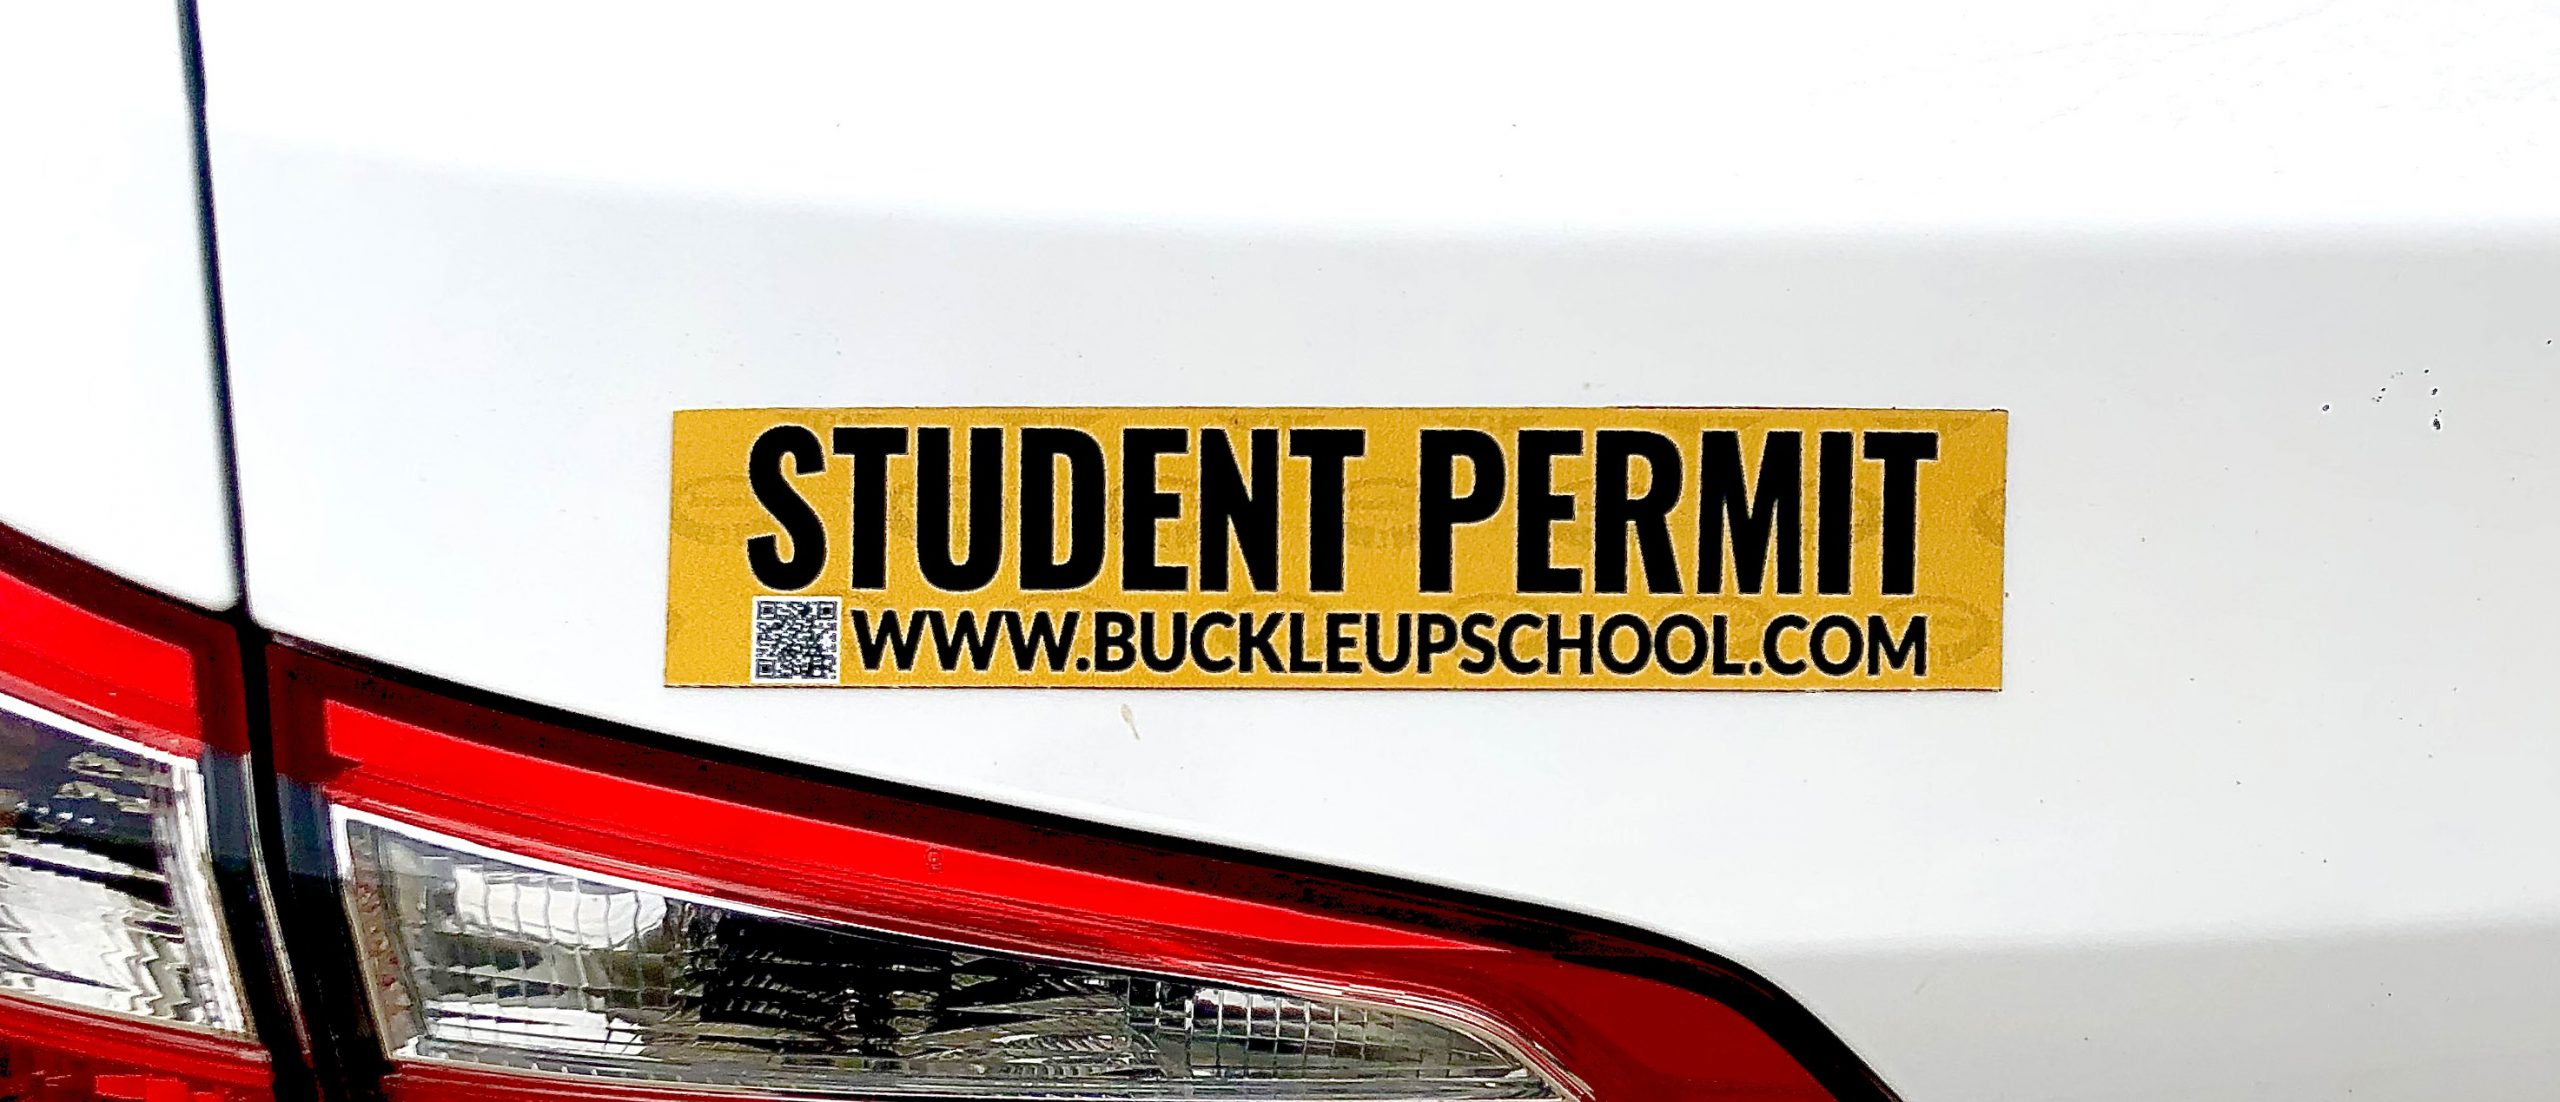 Student Driver